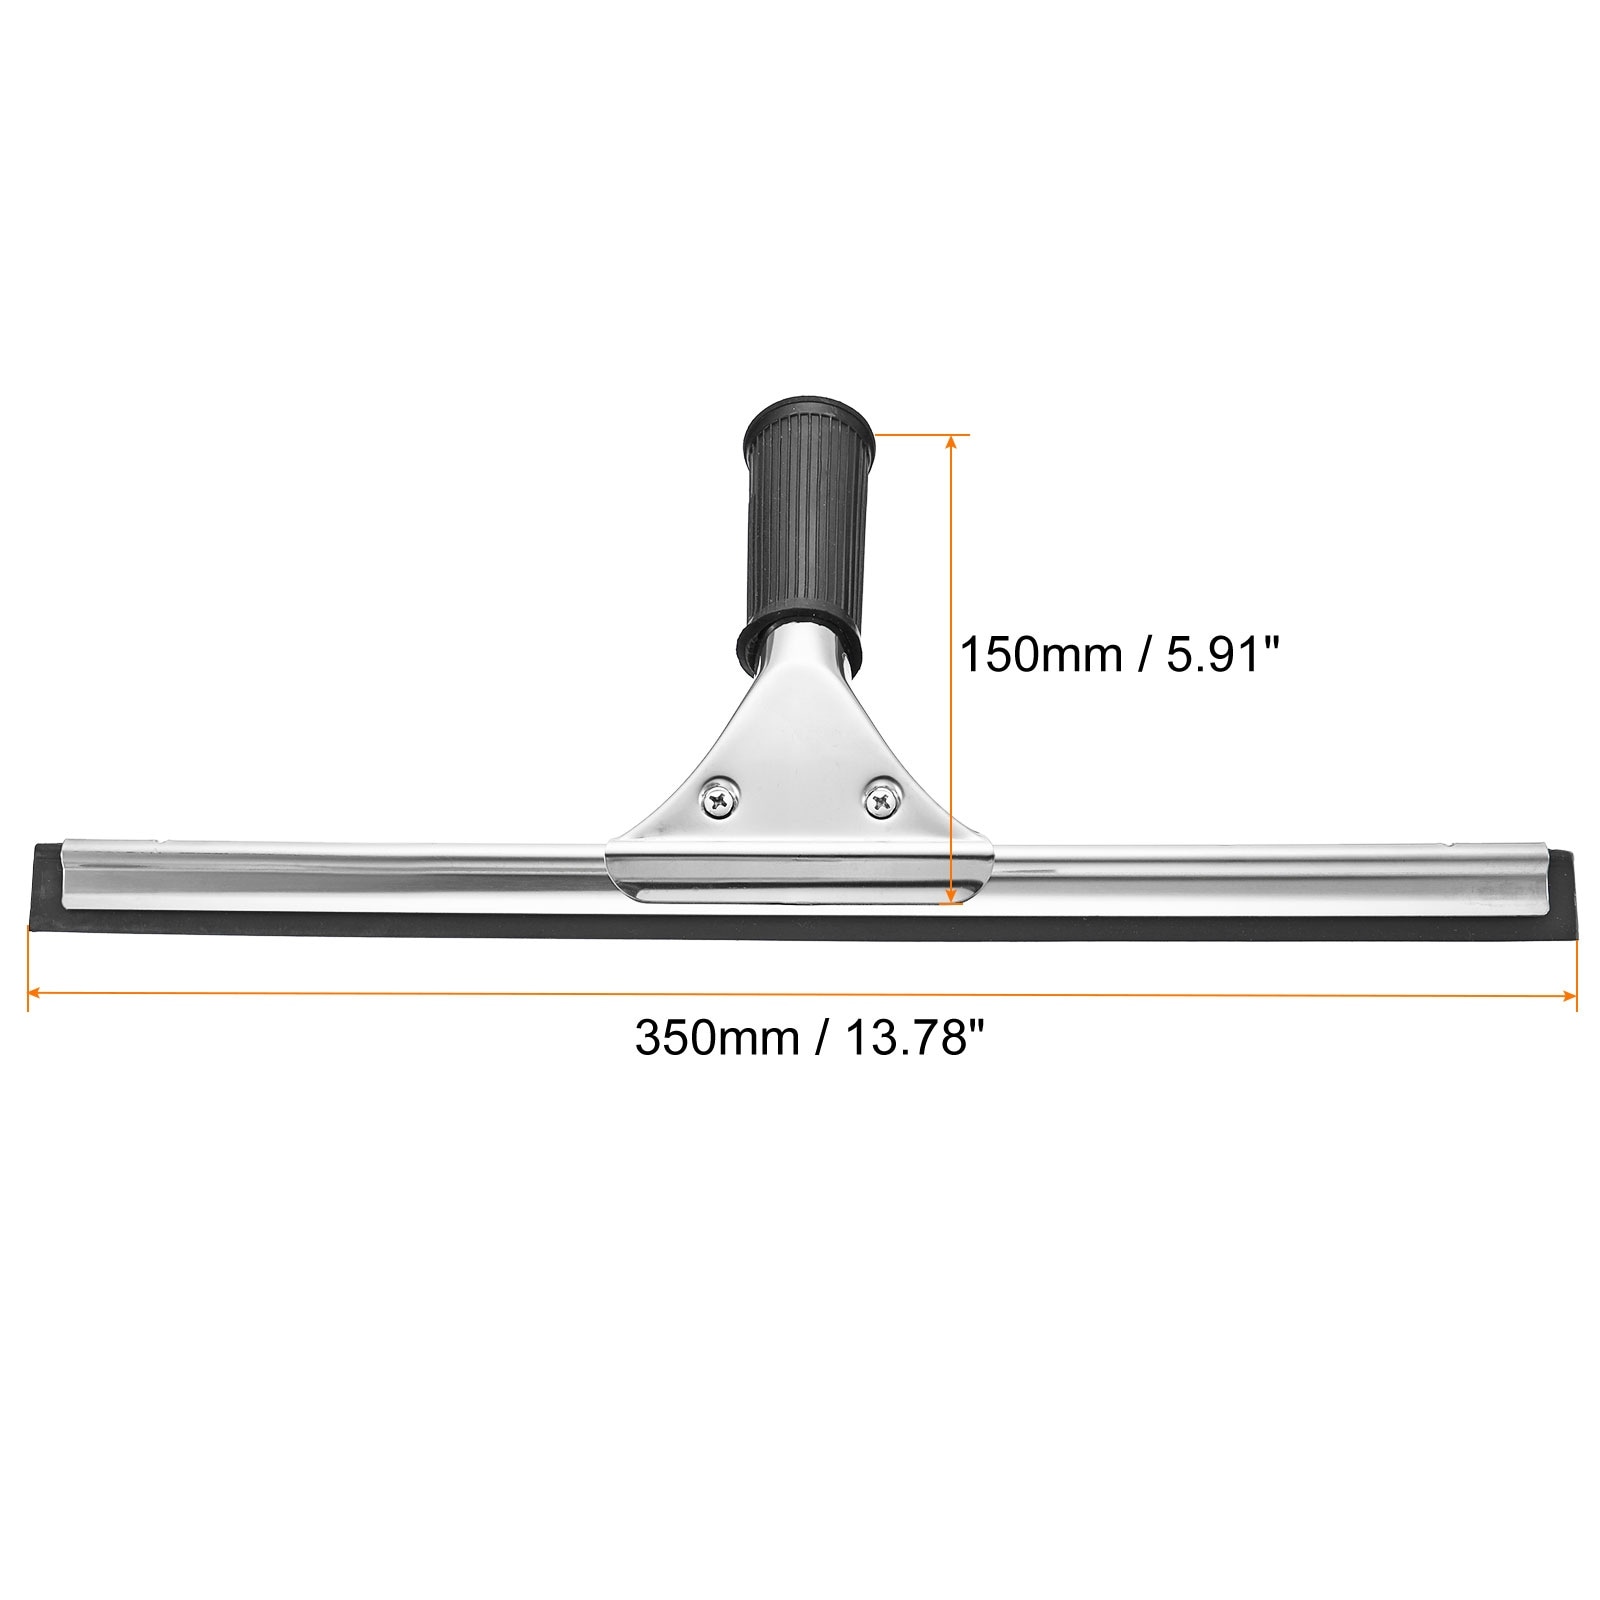 https://ak1.ostkcdn.com/images/products/is/images/direct/5ab90e91e05f83bd64180e72f61ffaa73ba173ab/Shower-Window-Squeegee-Stainless-Steel-Cleaning-Tool-13.78-Inch-Black.jpg